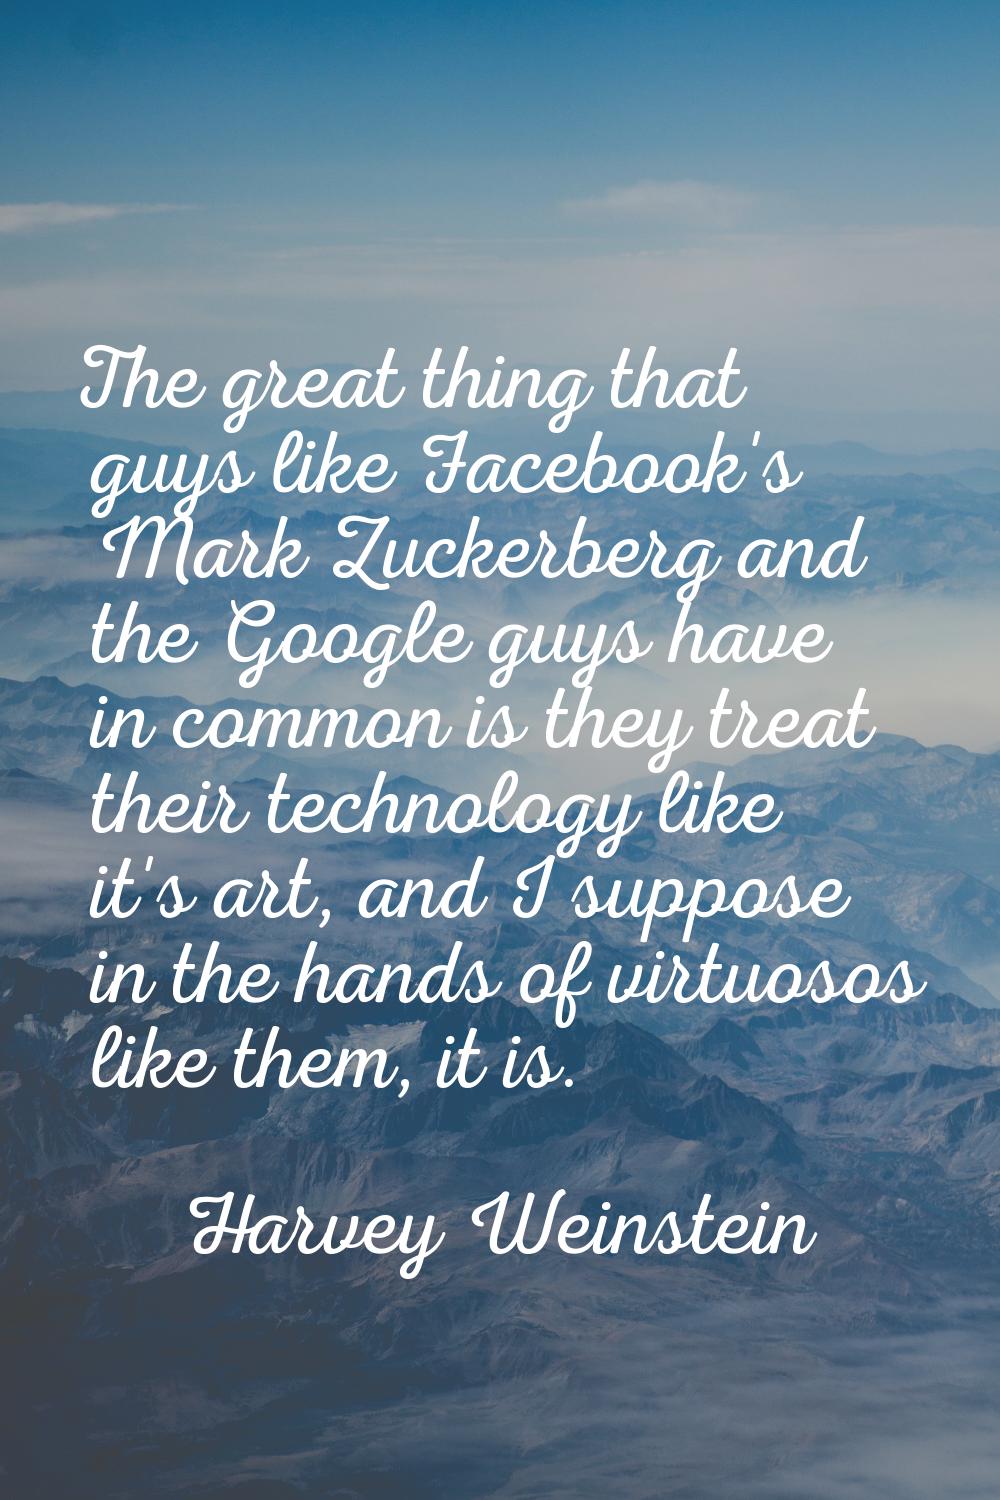 The great thing that guys like Facebook's Mark Zuckerberg and the Google guys have in common is the